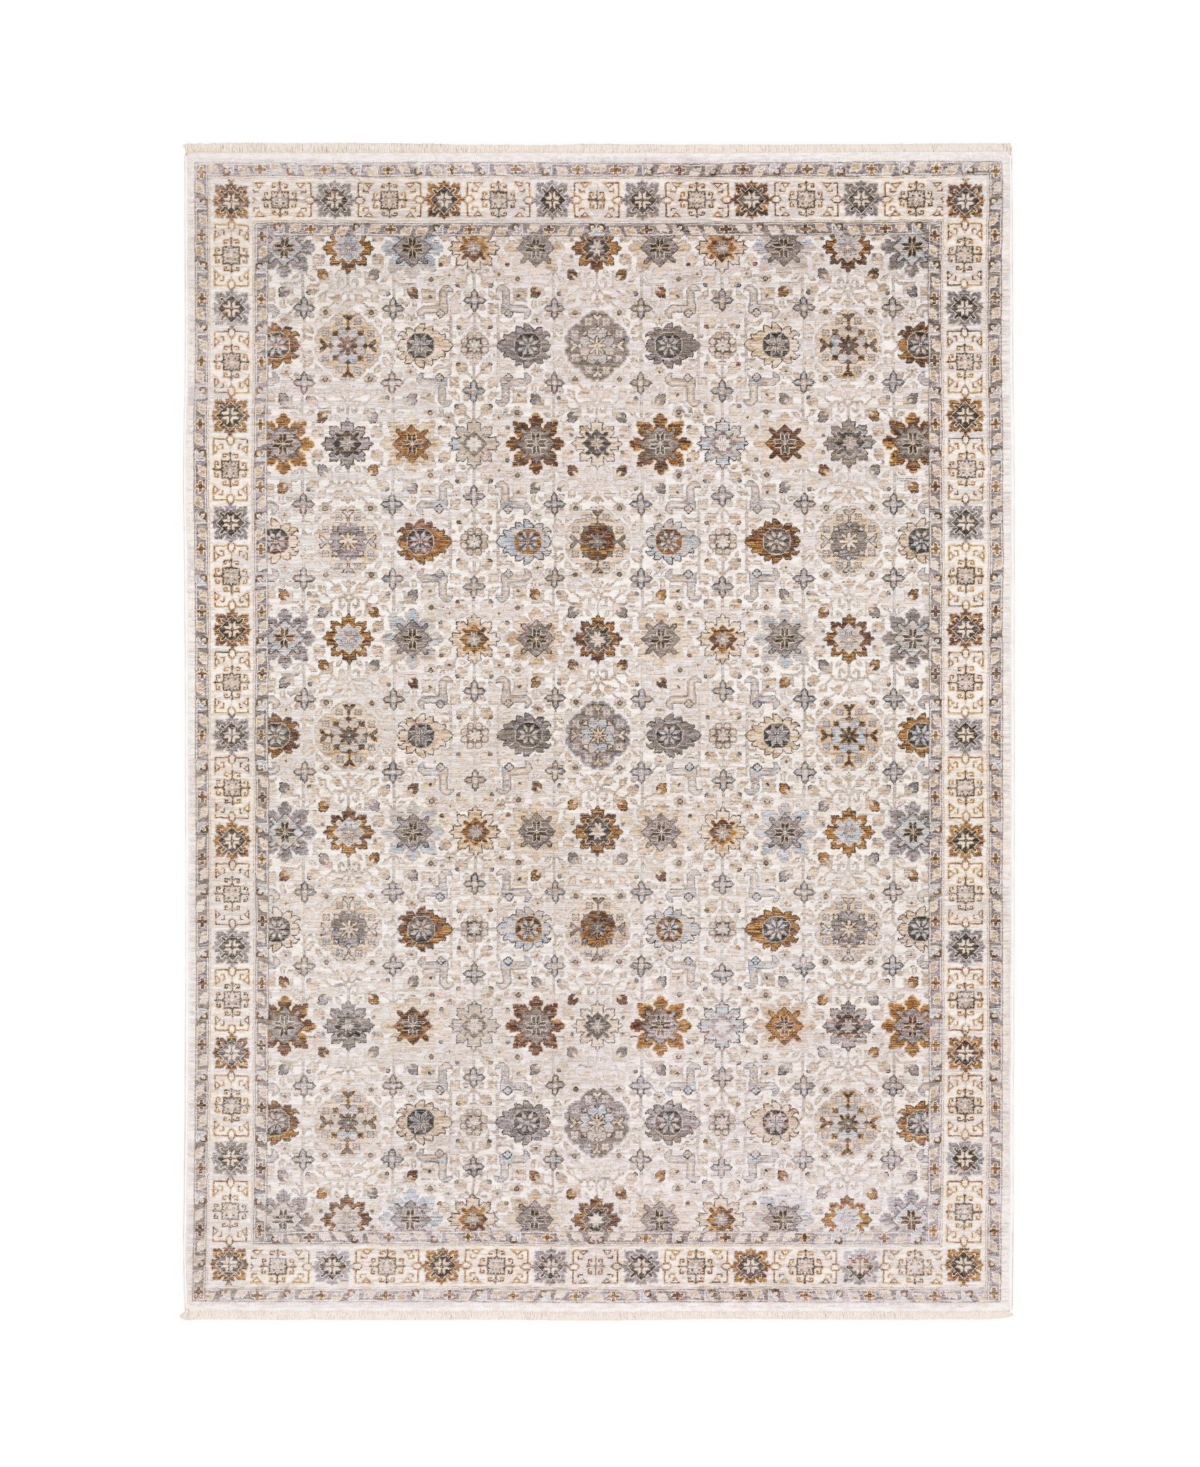 Jhb Design S Kumar Kum04 Ivory And Gold 7'10" X 10'10" Area Rug In Ivory,gold